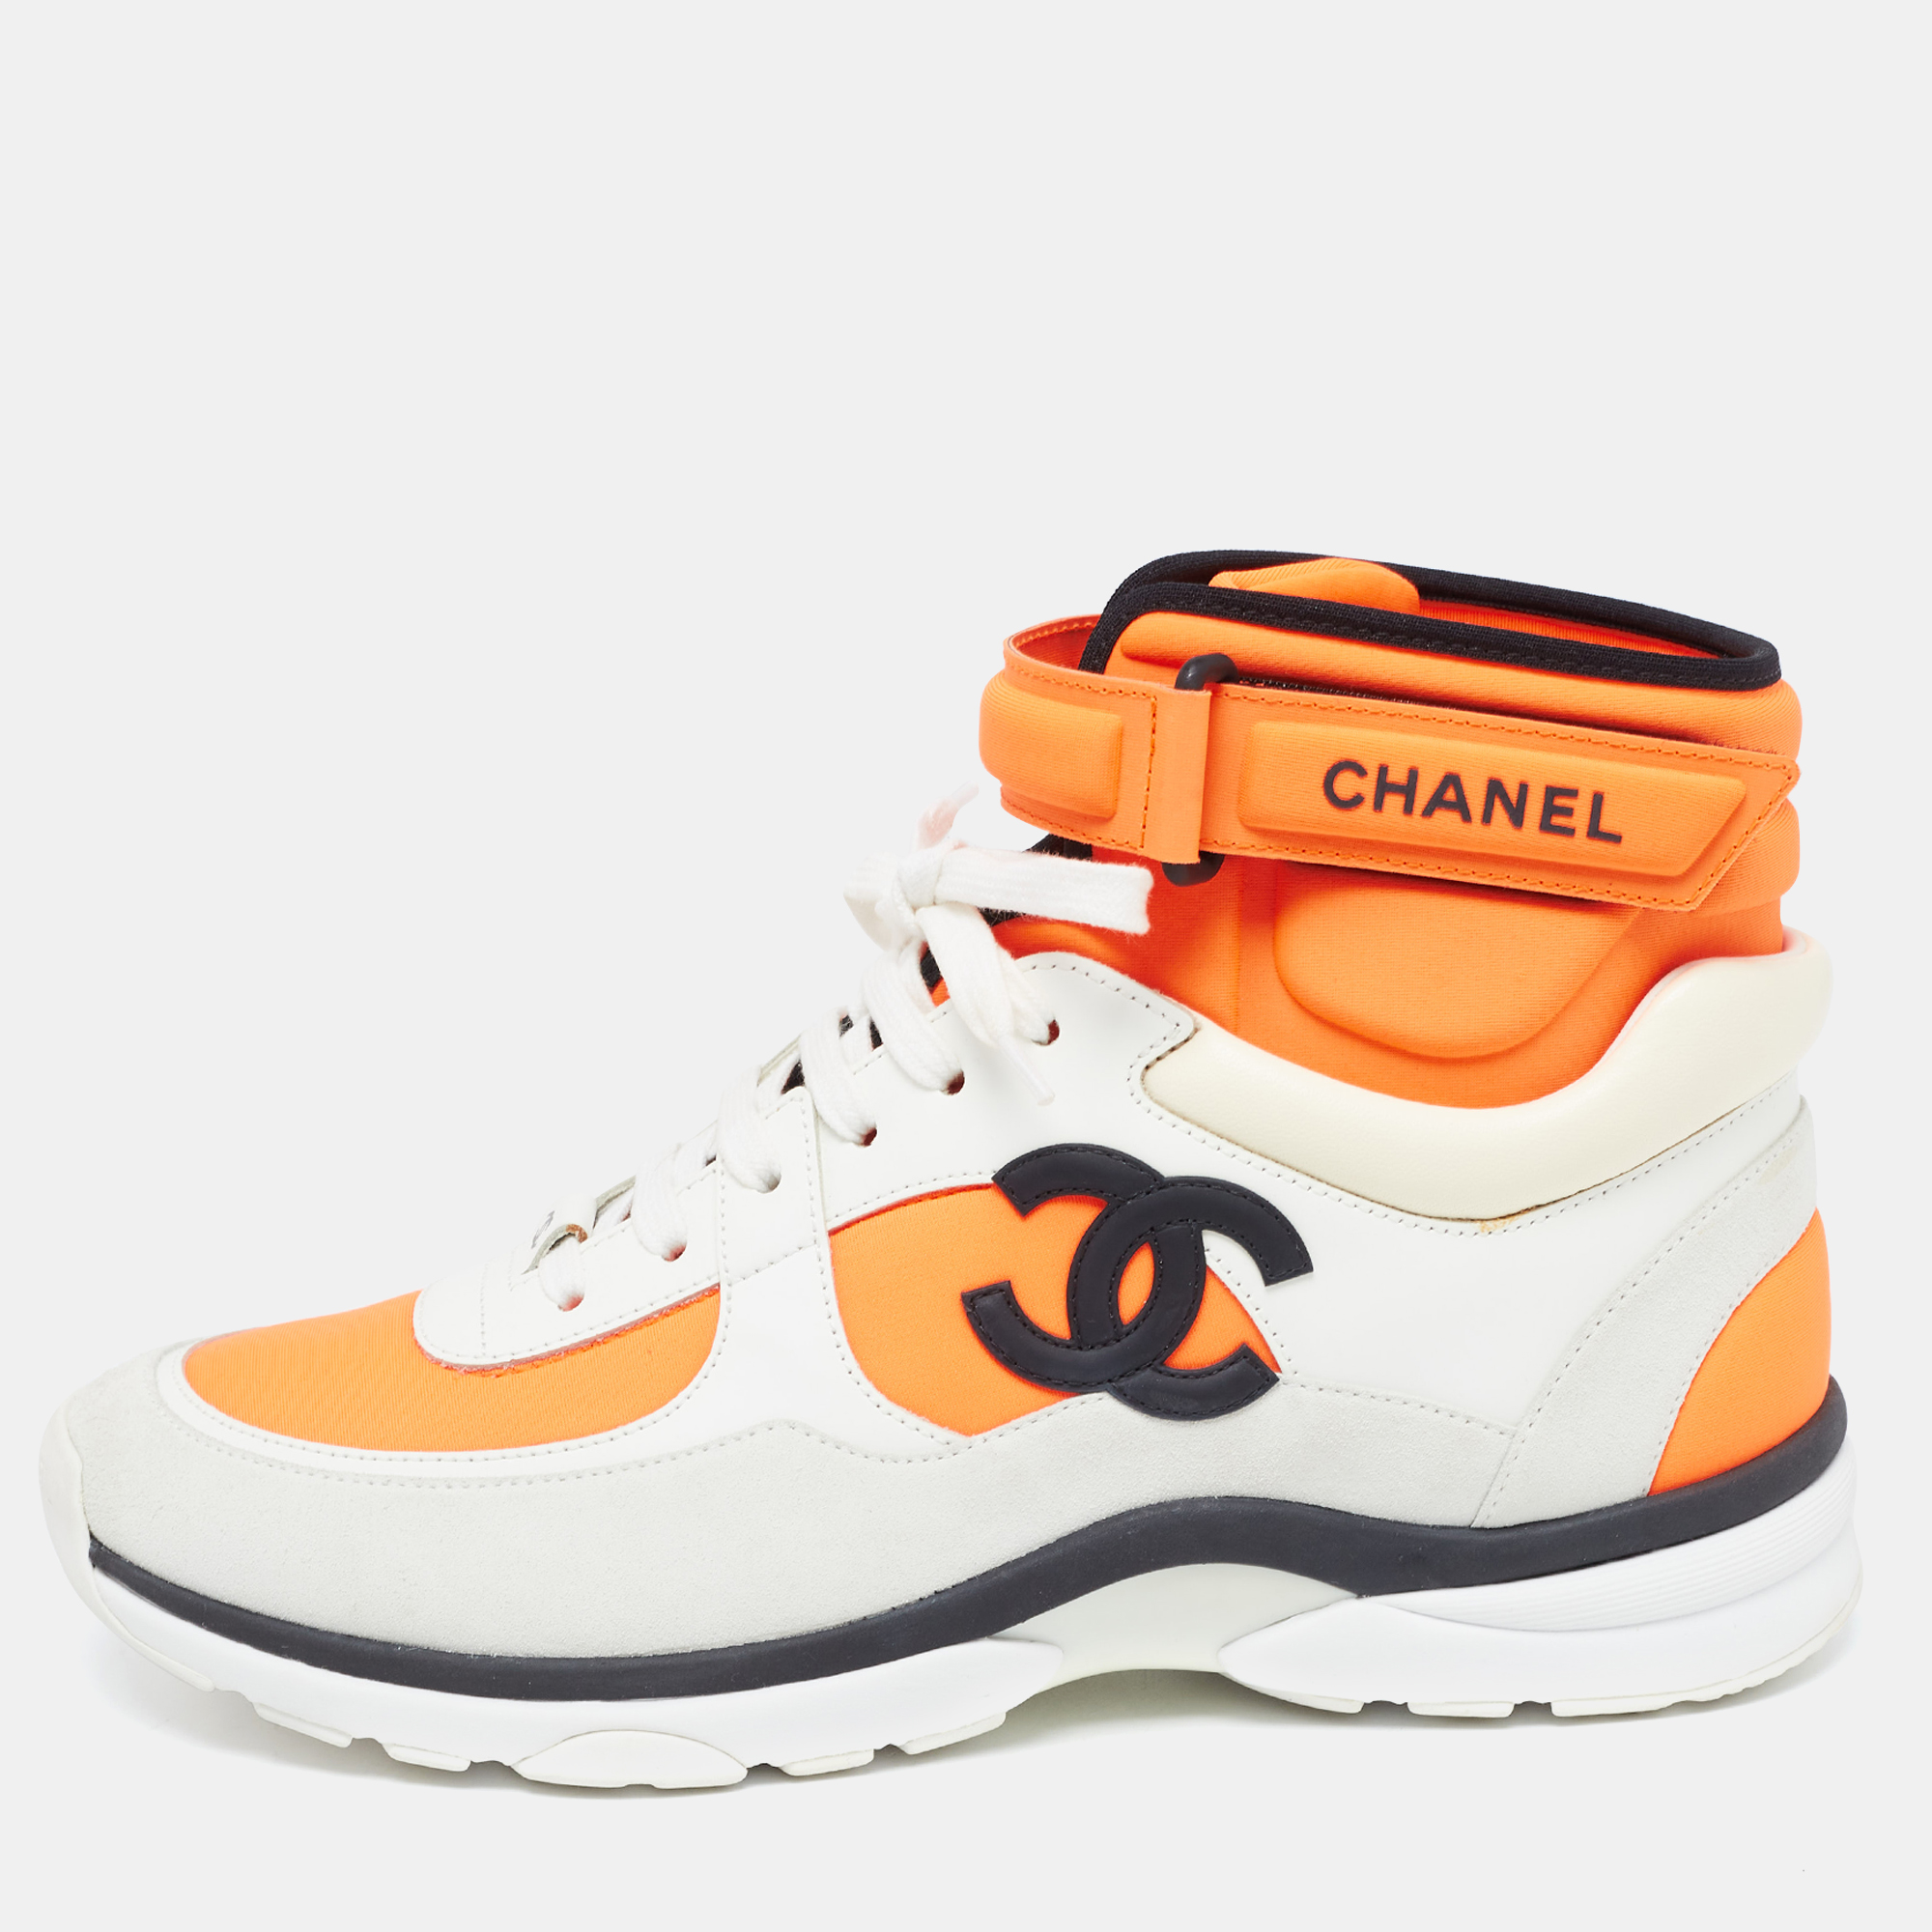 

Chanel Neon Orange/White Neoprene and Leather CC High Top Sneakers Size